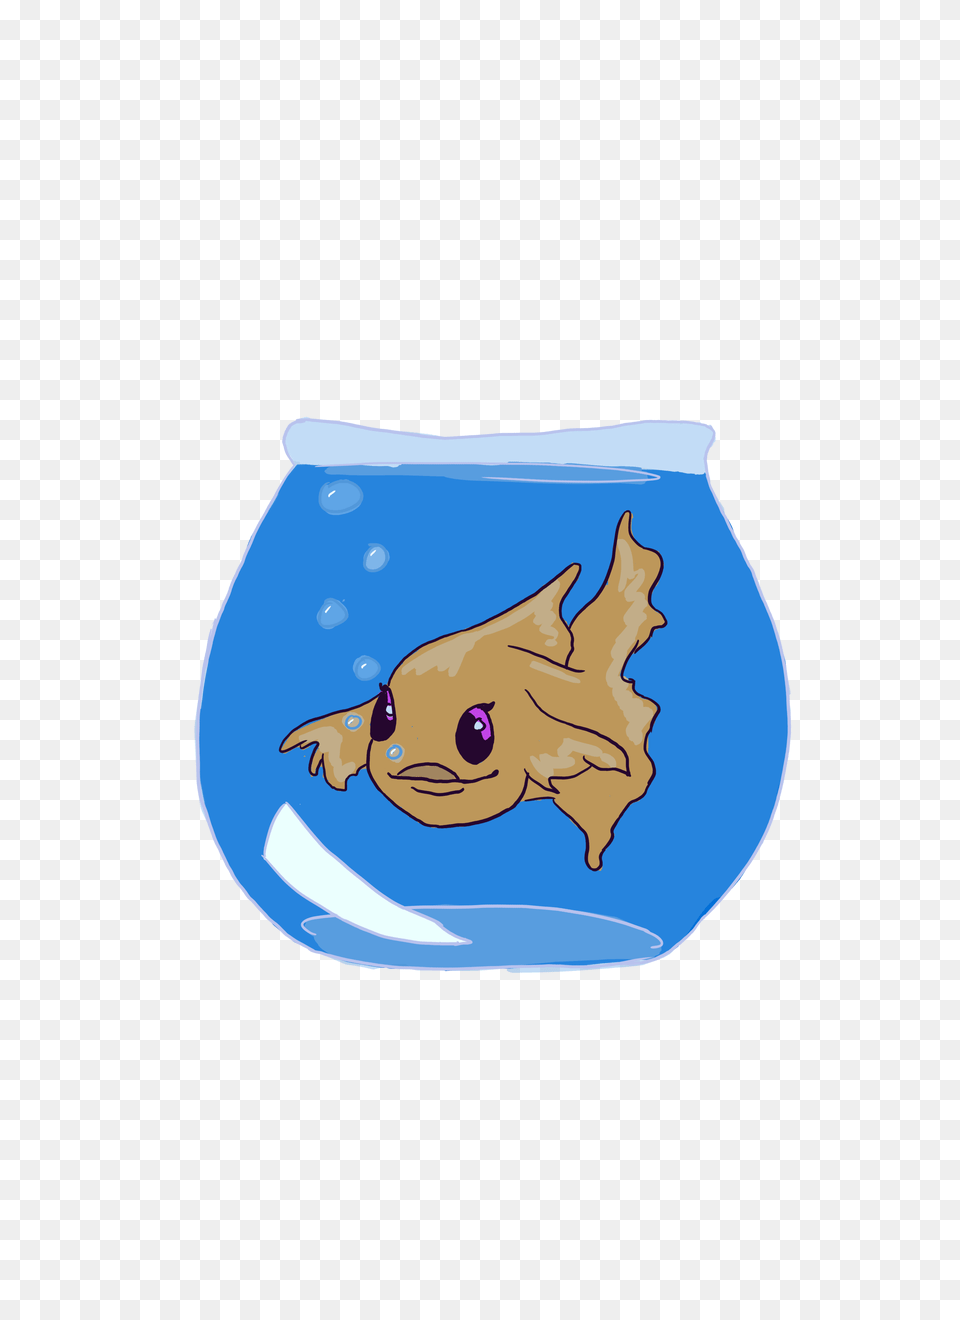 No Pets Allowed Invest In A Fish Bowl U2014 The Wake Cartoon, Jar Png Image